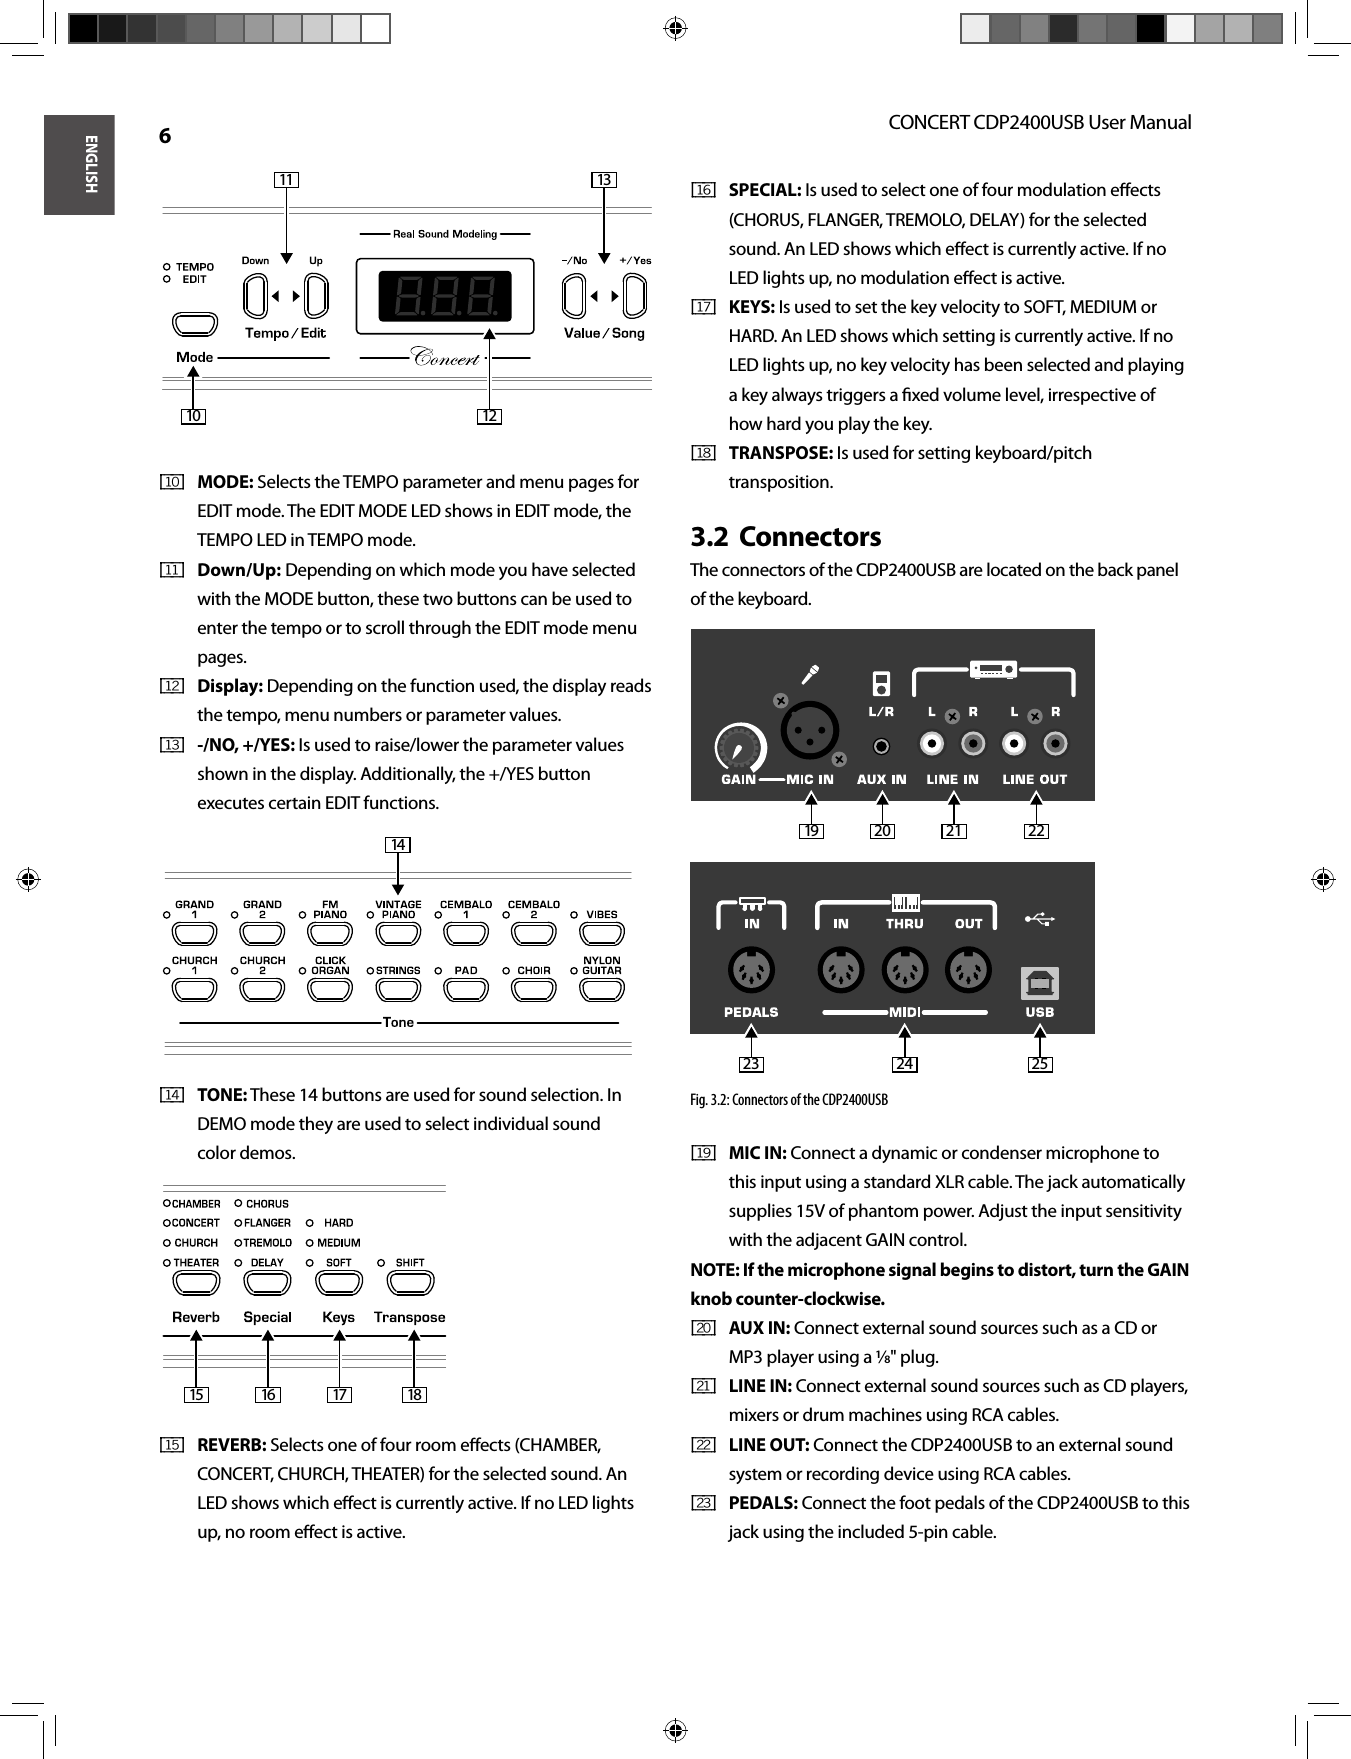 ENGLISHCONCERT CDP2400USB User Manual 6MODE:[ 10 ]   Selects the TEMPO parameter and menu pages for EDIT mode. The EDIT MODE LED shows in EDIT mode, the TEMPO LED in TEMPO mode.Down/Up:[ 11 ]   Depending on which mode you have selected with the MODE button, these two buttons can be used to enter the tempo or to scroll through the EDIT mode menu pages.Display:[ 12 ]   Depending on the function used, the display reads the tempo, menu numbers or parameter values.-/NO, +/YES:[ 13 ]   Is used to raise/lower the parameter values shown in the display. Additionally, the +/YES button executes certain EDIT functions.TONE:[ 14 ]   These 14 buttons are used for sound selection. In DEMO mode they are used to select individual sound color demos.REVERB:[ 15 ]   Selects one of four room eﬀ ects (CHAMBER, CONCERT, CHURCH, THEATER) for the selected sound. An LED shows which eﬀ ect is currently active. If no LED lights up, no room eﬀ ect is active.SPECIAL:[ 16 ]   Is used to select one of four modulation eﬀ ects (CHORUS, FLANGER, TREMOLO, DELAY) for the selected sound. An LED shows which eﬀ ect is currently active. If no LED lights up, no modulation eﬀ ect is active.KEYS:[ 17 ]   Is used to set the key velocity to SOFT, MEDIUM or HARD. An LED shows which setting is currently active. If no LED lights up, no key velocity has been selected and playing a key always triggers a ﬁ xed volume level, irrespective of how hard you play the key.TRANSPOSE:[ 18 ]   Is used for setting keyboard/pitch transposition.Connectors3.2  The connectors of the CDP2400USB are located on the back panel of the keyboard.Fig. 3.2: Connectors of the CDP2400USBMIC IN:[ 19 ]   Connect a dynamic or condenser microphone to this input using a standard XLR cable. The jack automatically supplies 15V of phantom power. Adjust the input sensitivity with the adjacent GAIN control. NOTE: If the microphone signal begins to distort, turn the GAIN knob counter-clockwise. AUX IN:[ 20 ]   Connect external sound sources such as a CD or MP3 player using a ⁄&quot; plug. LINE IN:[ 21 ]   Connect external sound sources such as CD players, mixers or drum machines using RCA cables. LINE OUT:[ 22 ]   Connect the CDP2400USB to an external sound system or recording device using RCA cables. PEDALS:[ 23 ]   Connect the foot pedals of the CDP2400USB to this jack using the included 5-pin cable.131110 121415 16 17 1819 20 21 2223 24 25